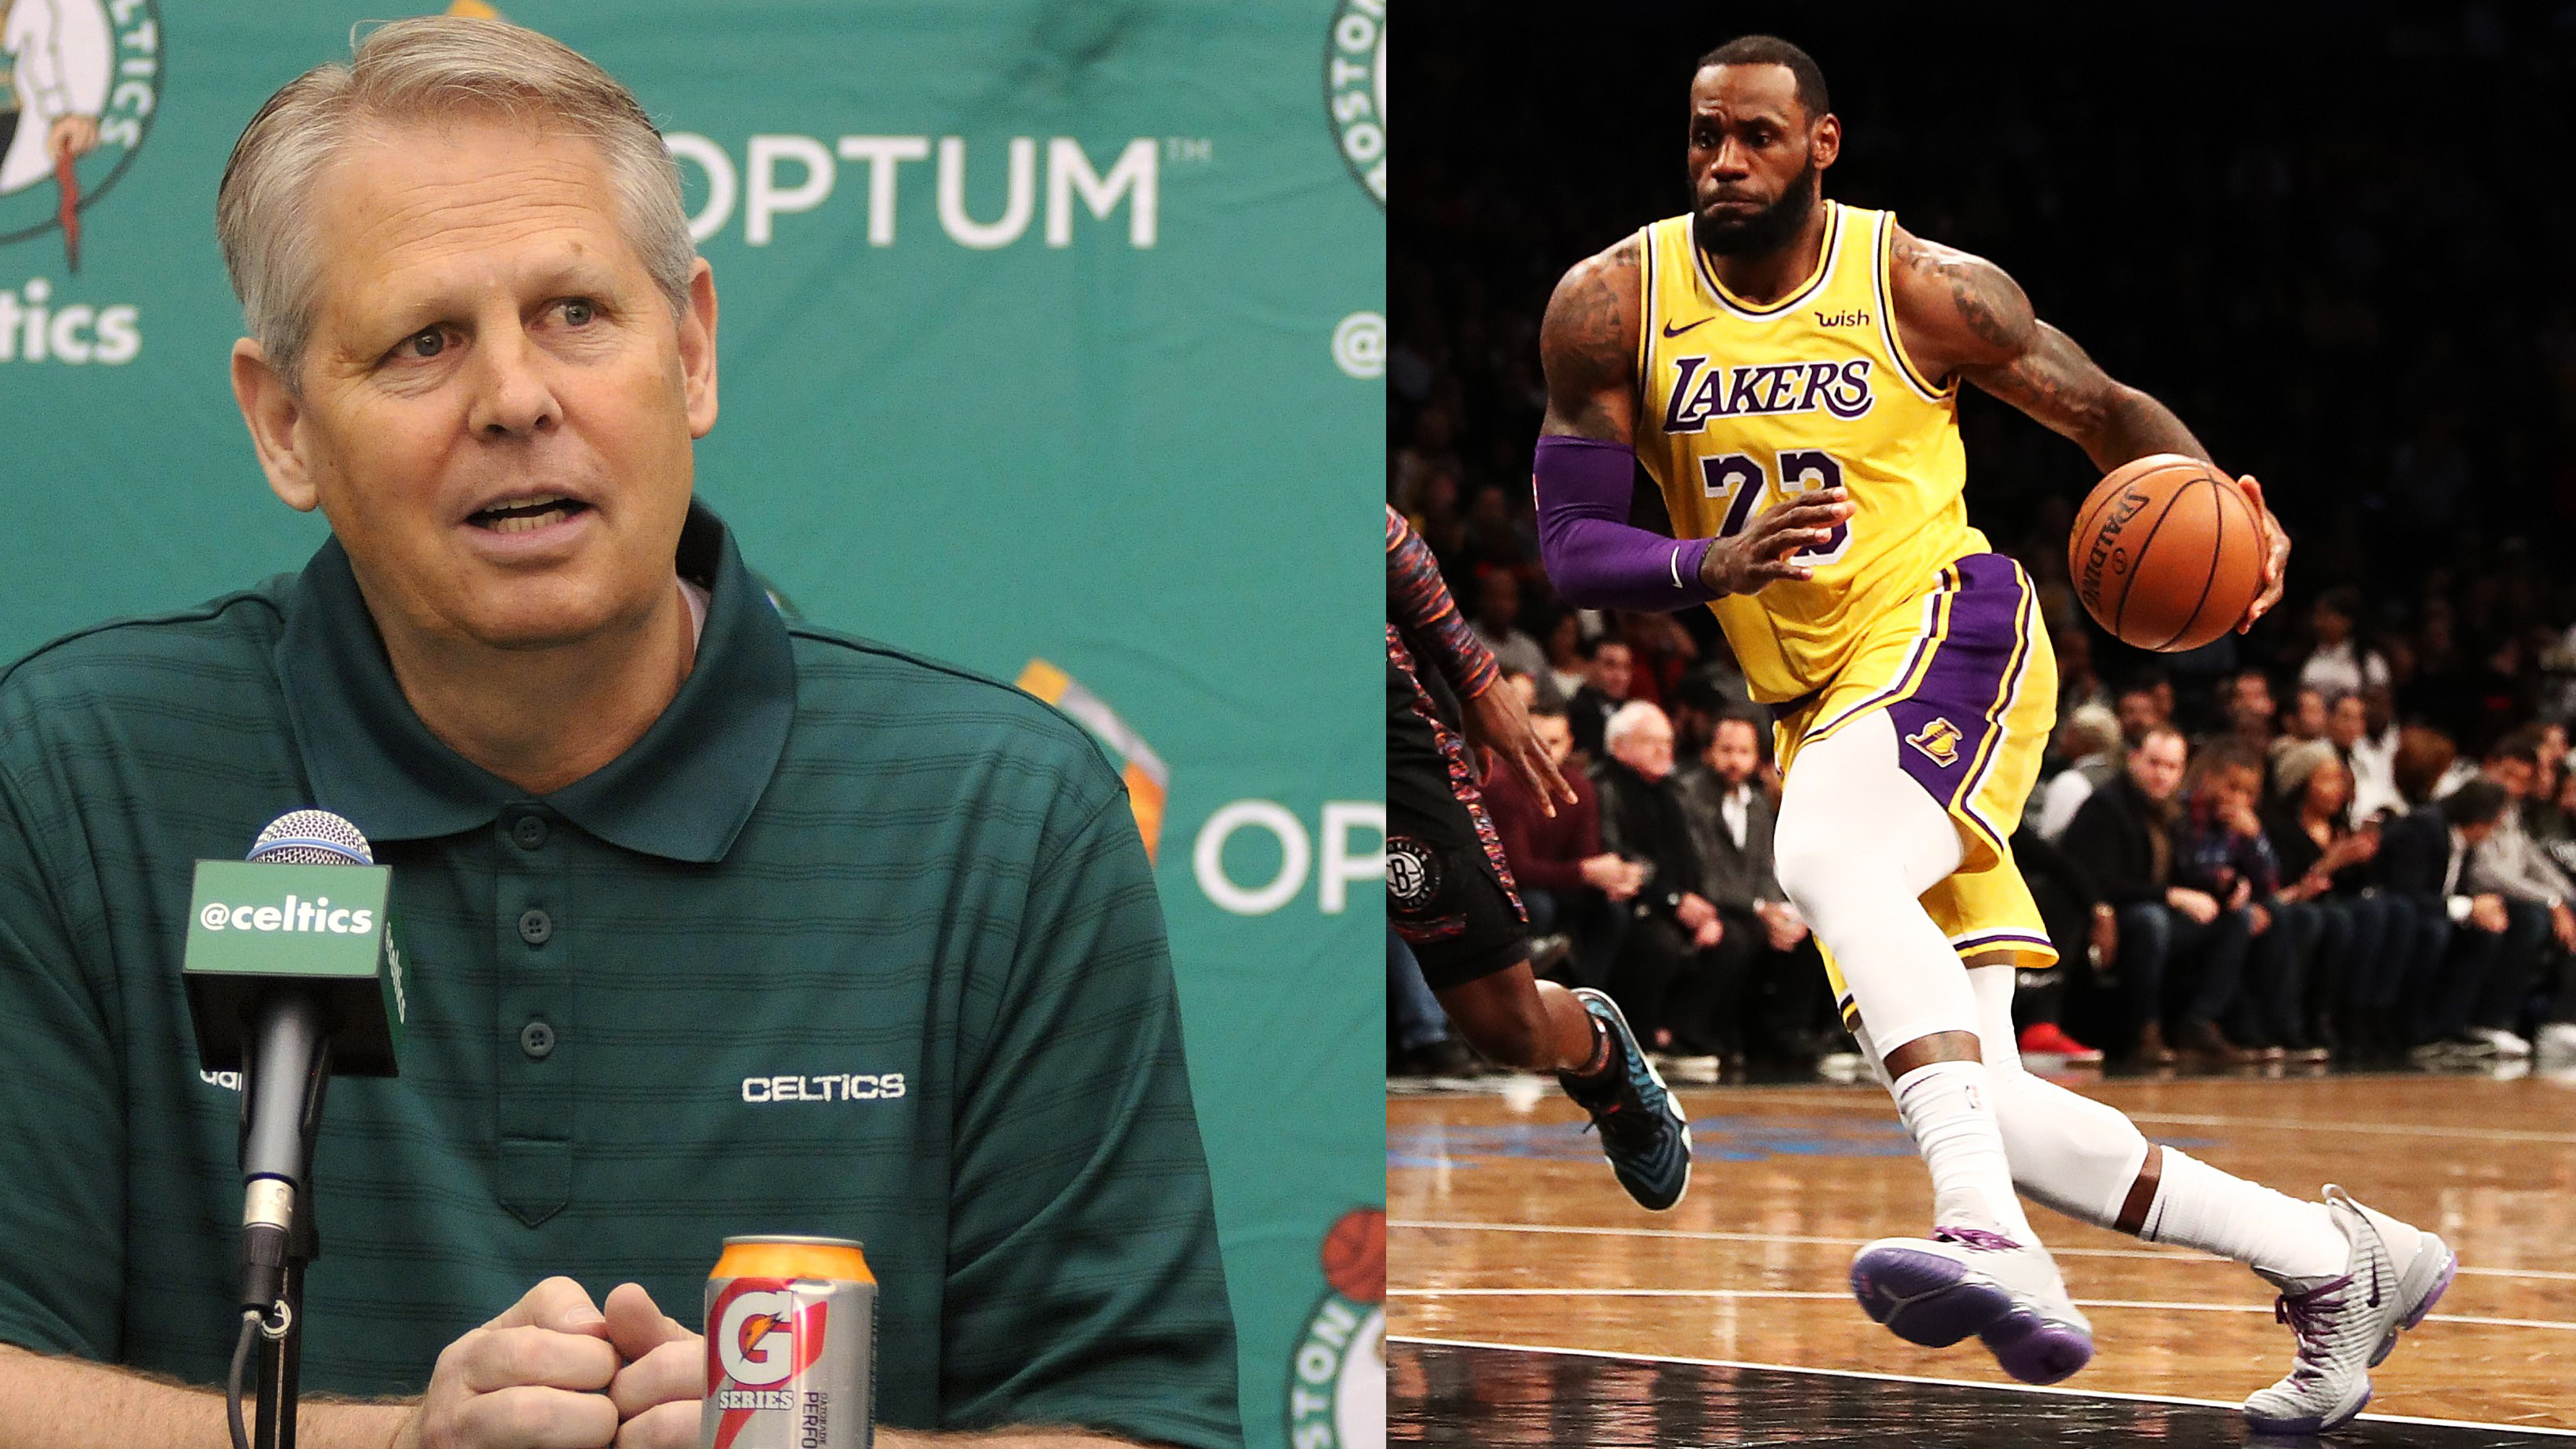 Danny Ainge has a tell when it comes to players he likes